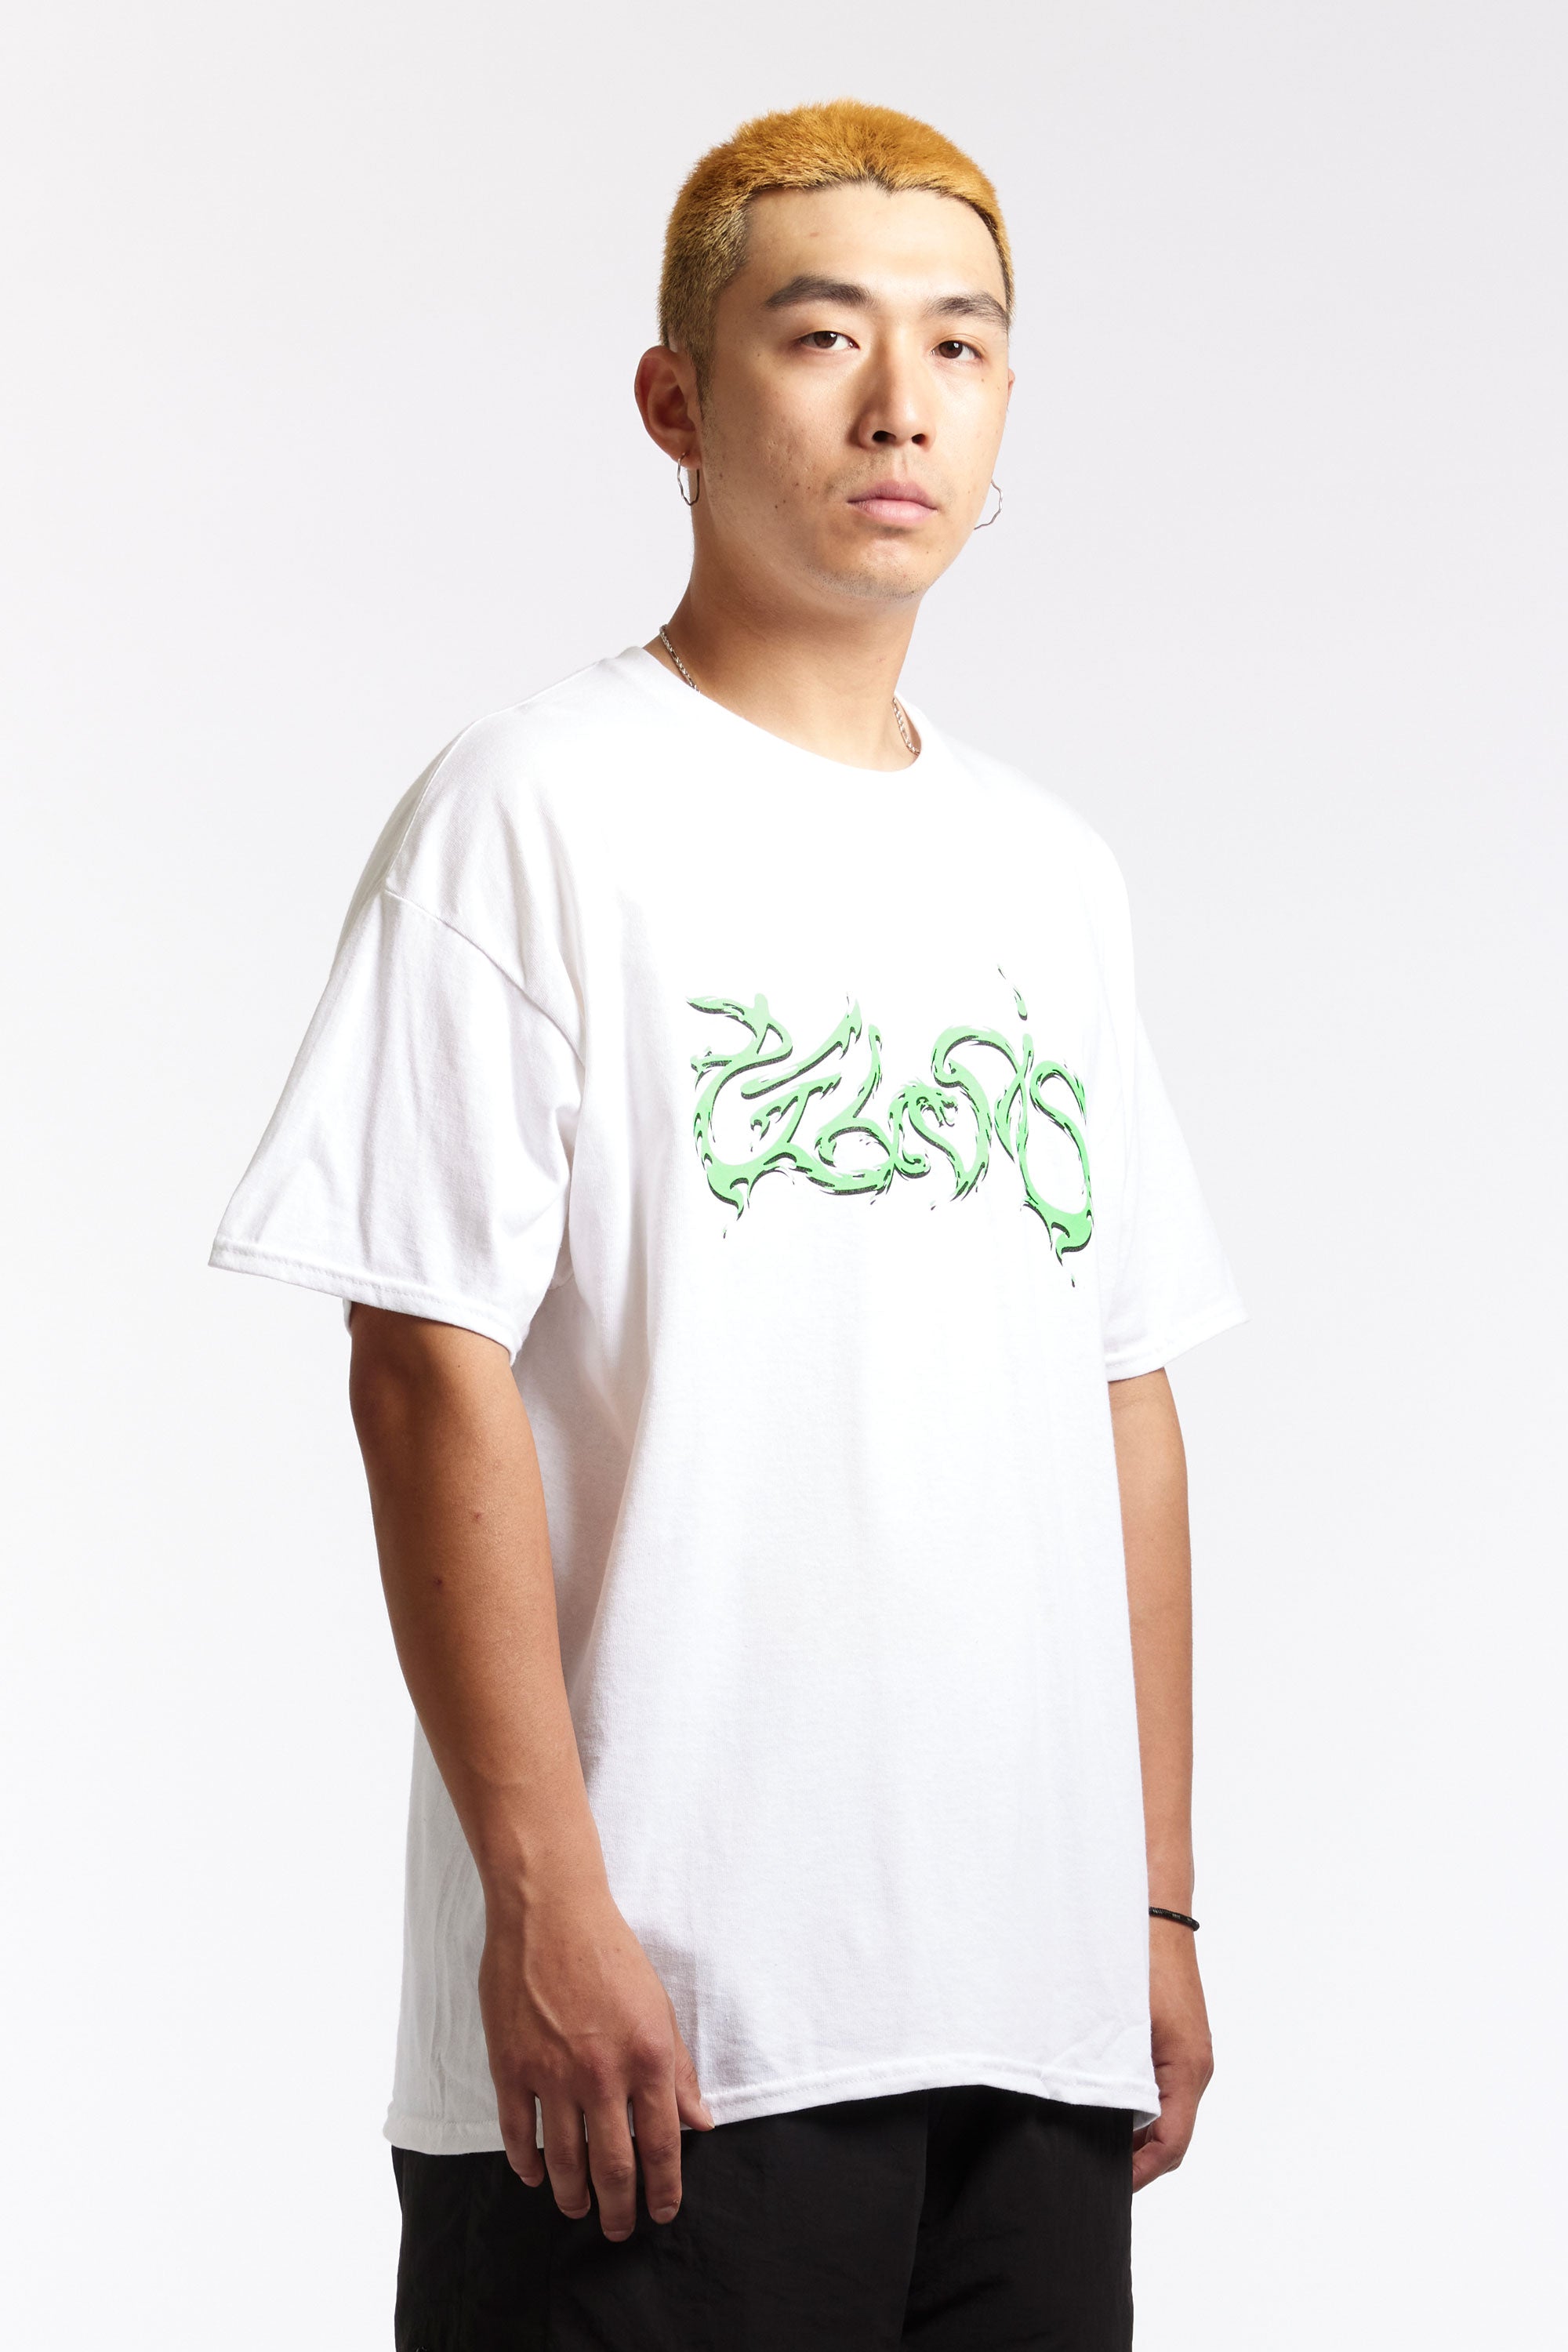 The PELVIS - CHAOS DRAGON TEE  available online with global shipping, and in PAM Stores Melbourne and Sydney.